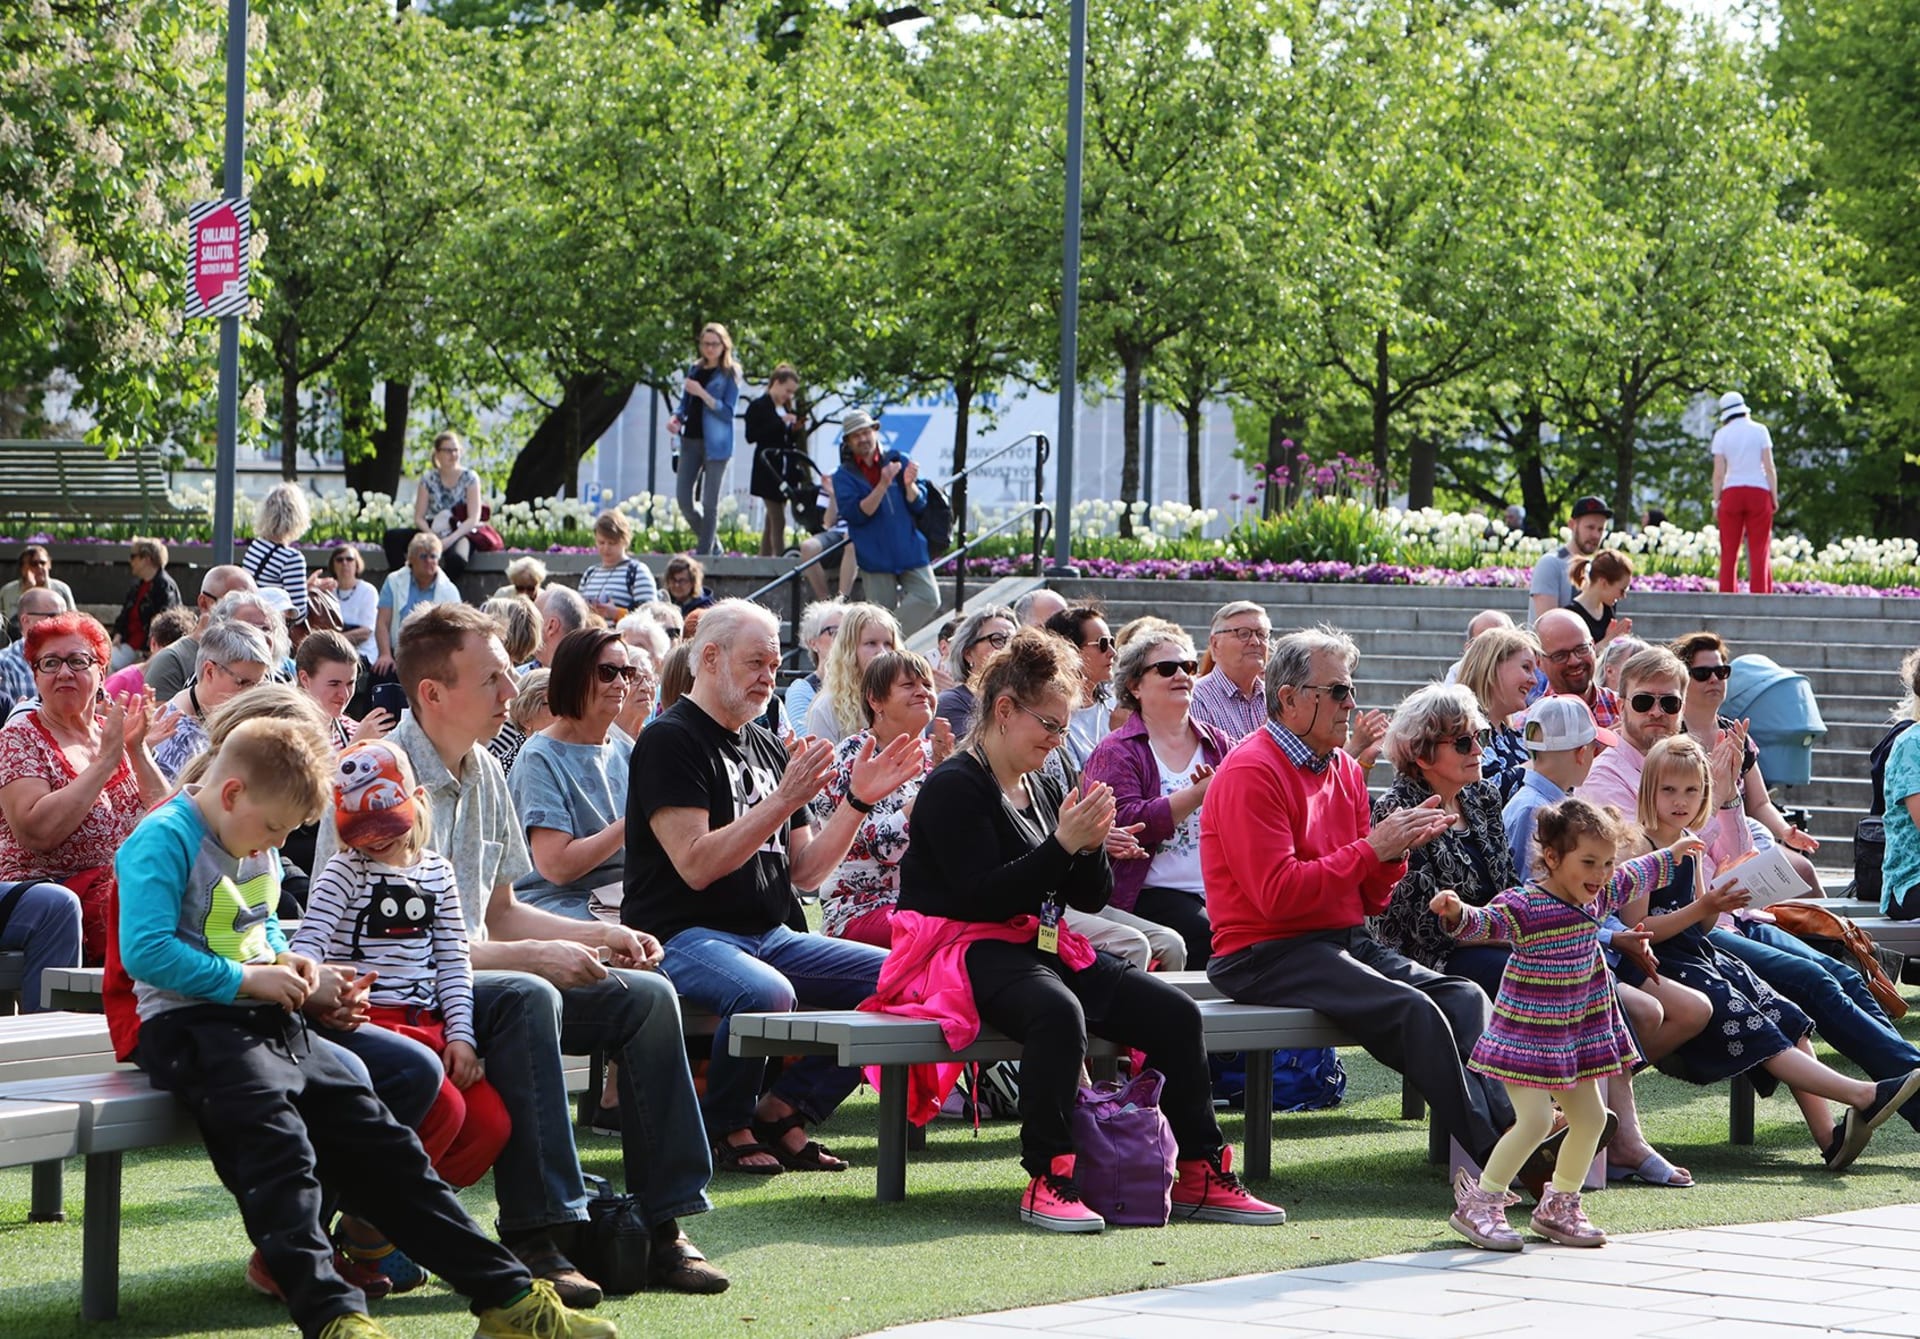 Audience enjoying an outdoor event during the festival